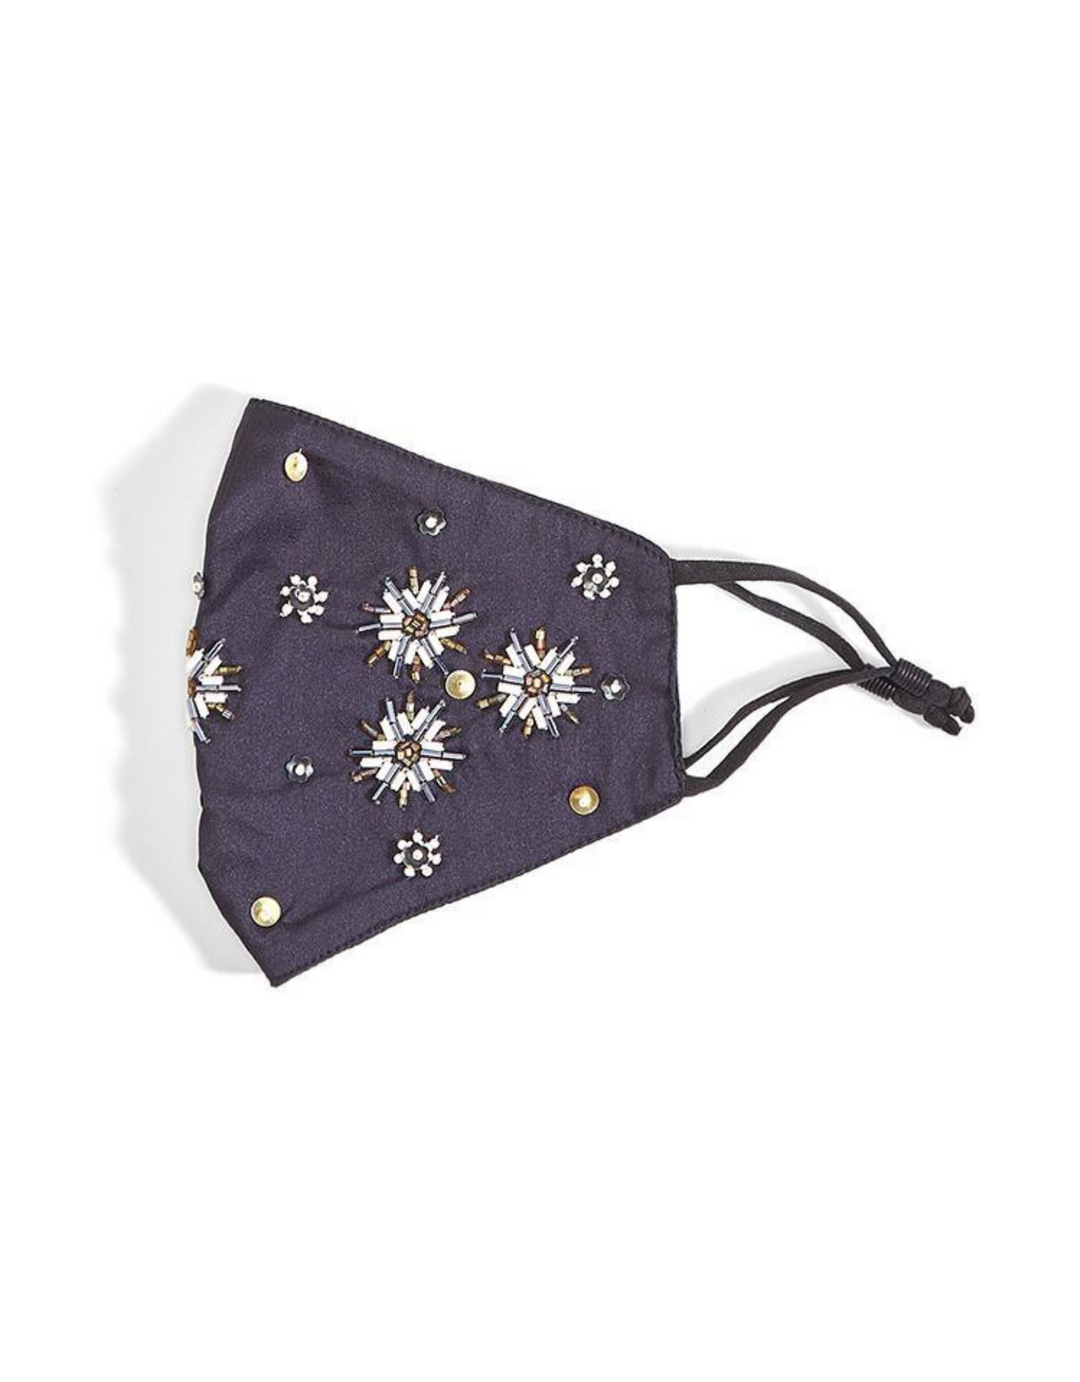 3 LAYER CRYSTAL EMBELLISHED FACE COVER - Kingfisher Road - Online Boutique